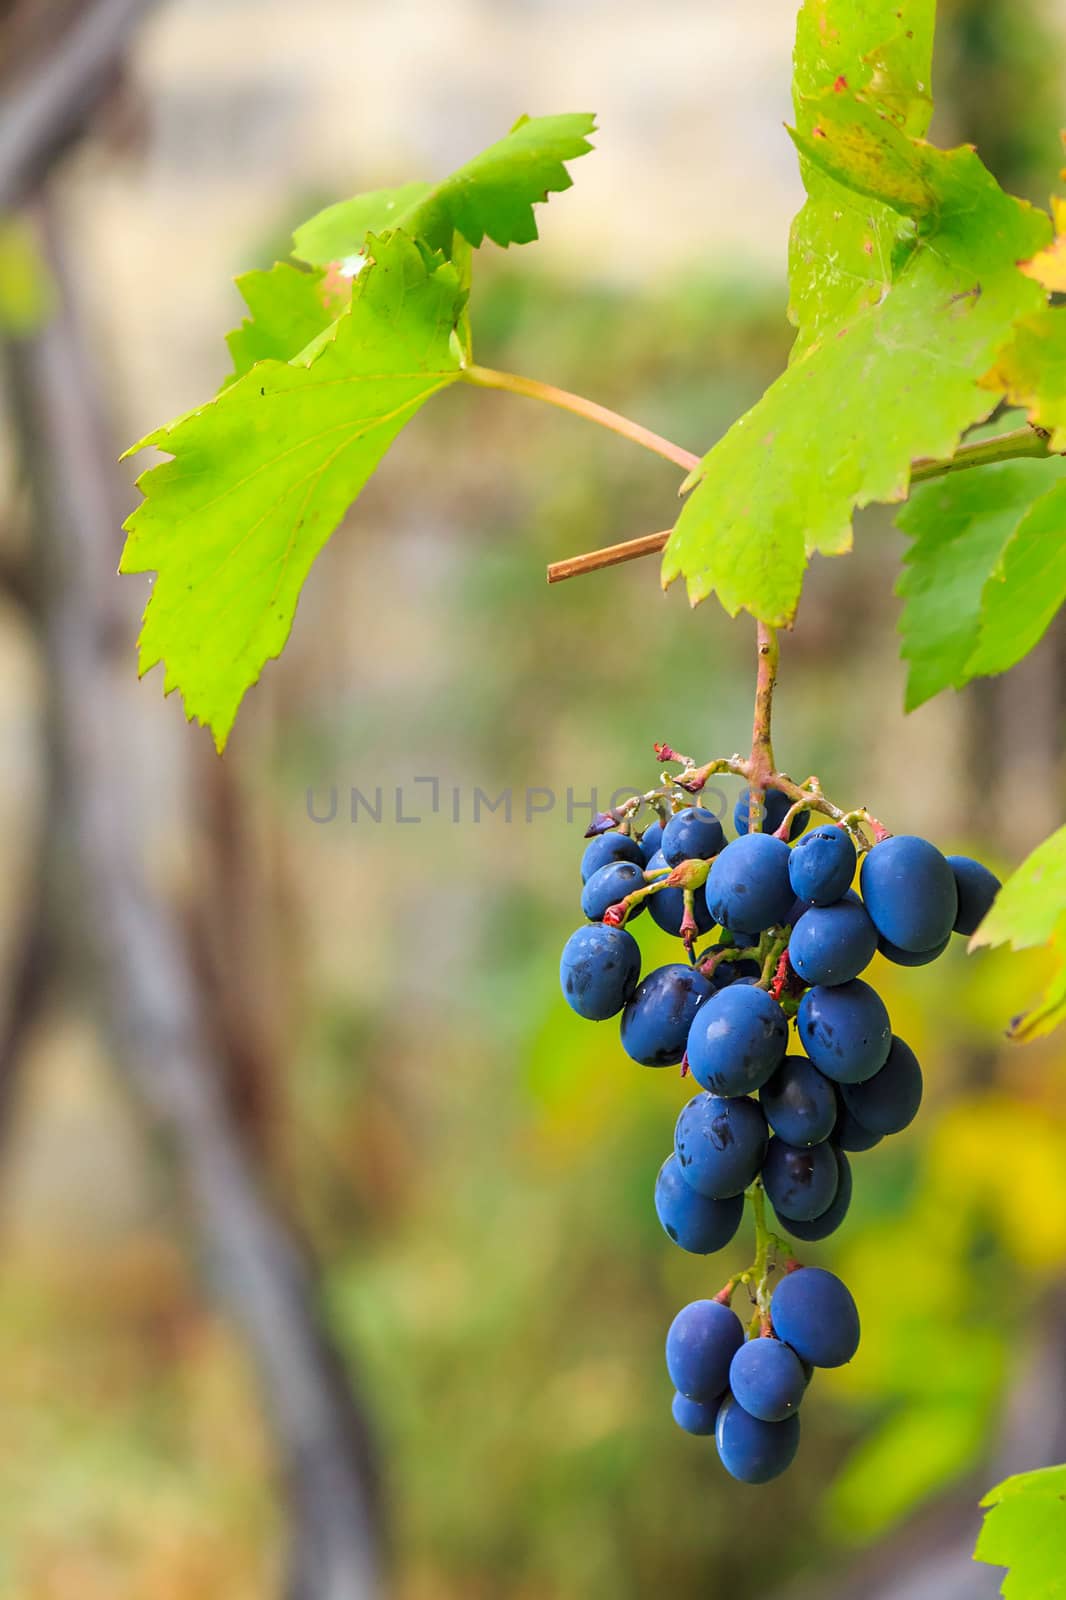 blue grapes with green leaves on vineyard blurred background by Pellinni